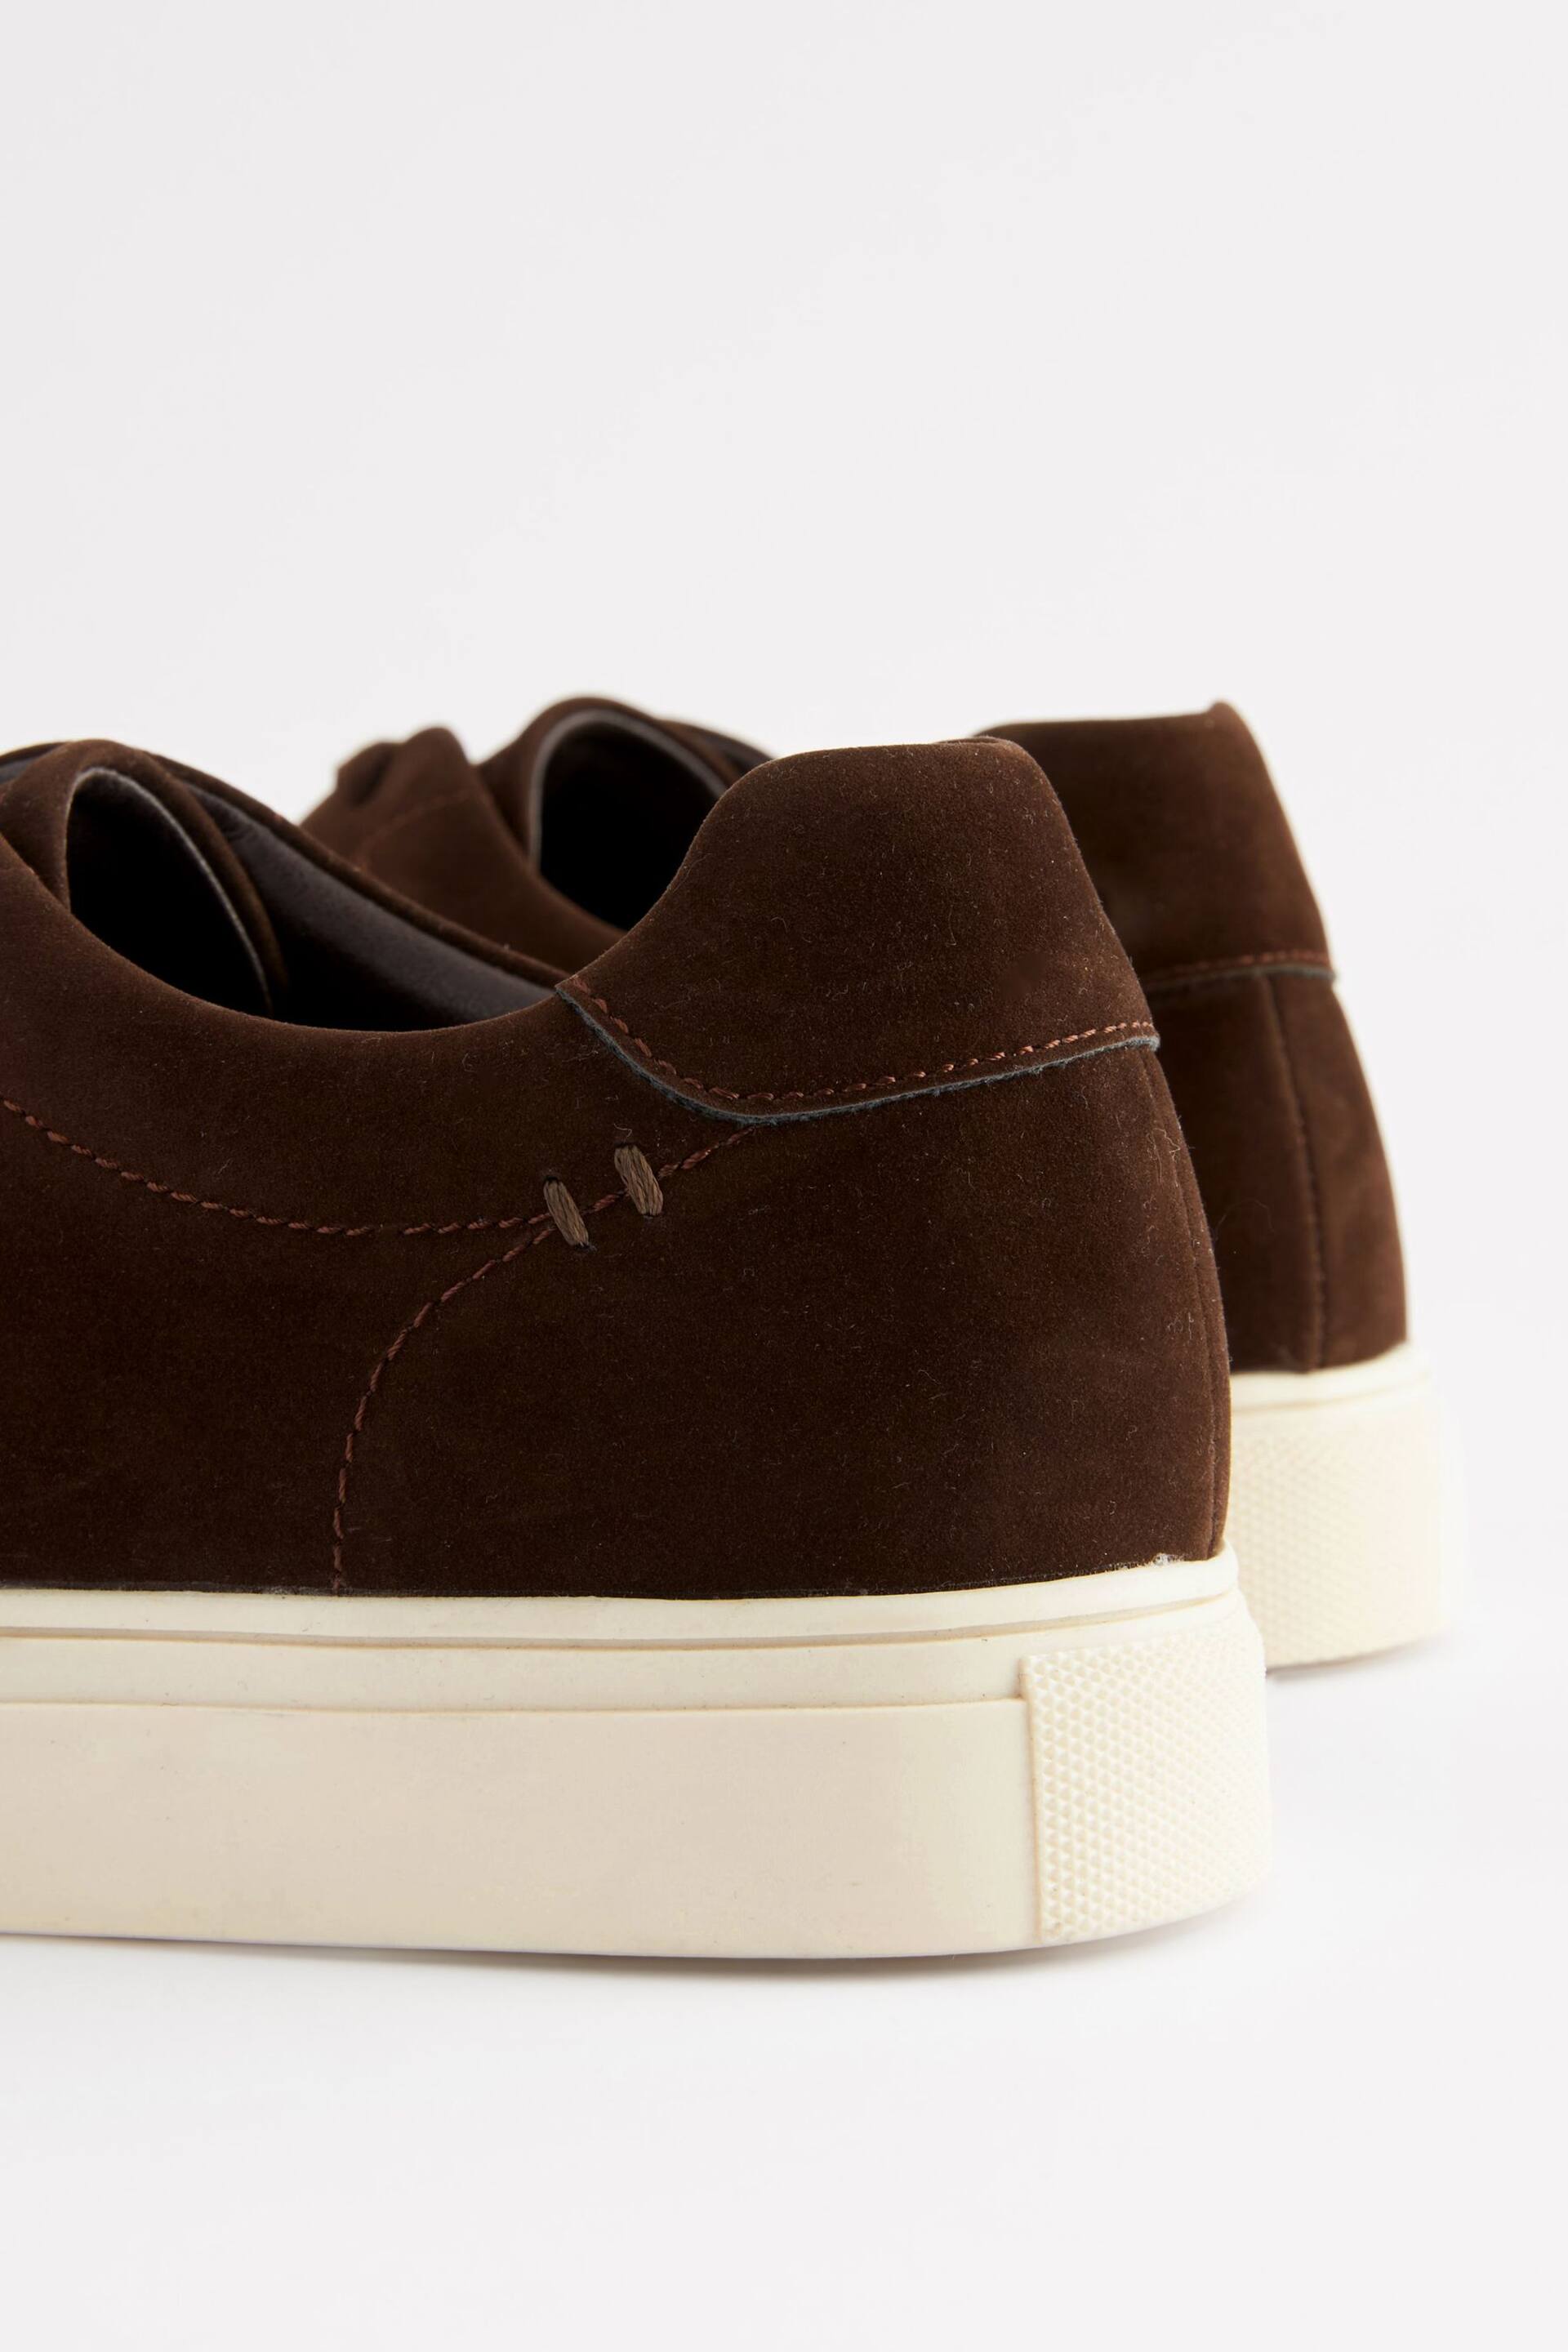 Brown Minimal Trainers - Image 3 of 5